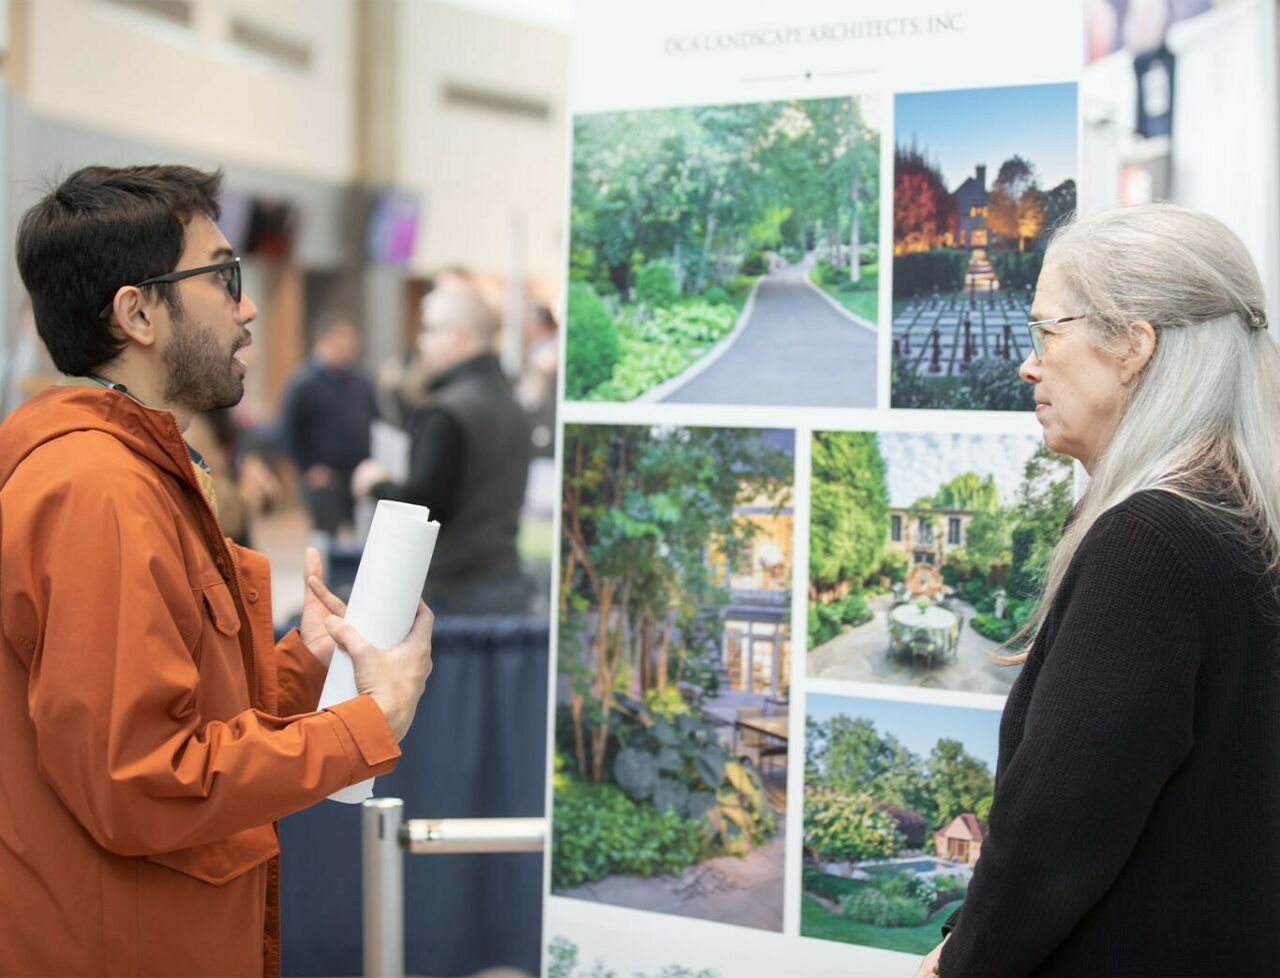 A student at left looks up while speaking to a woman at right in front of a landscape architecture firm's poster.